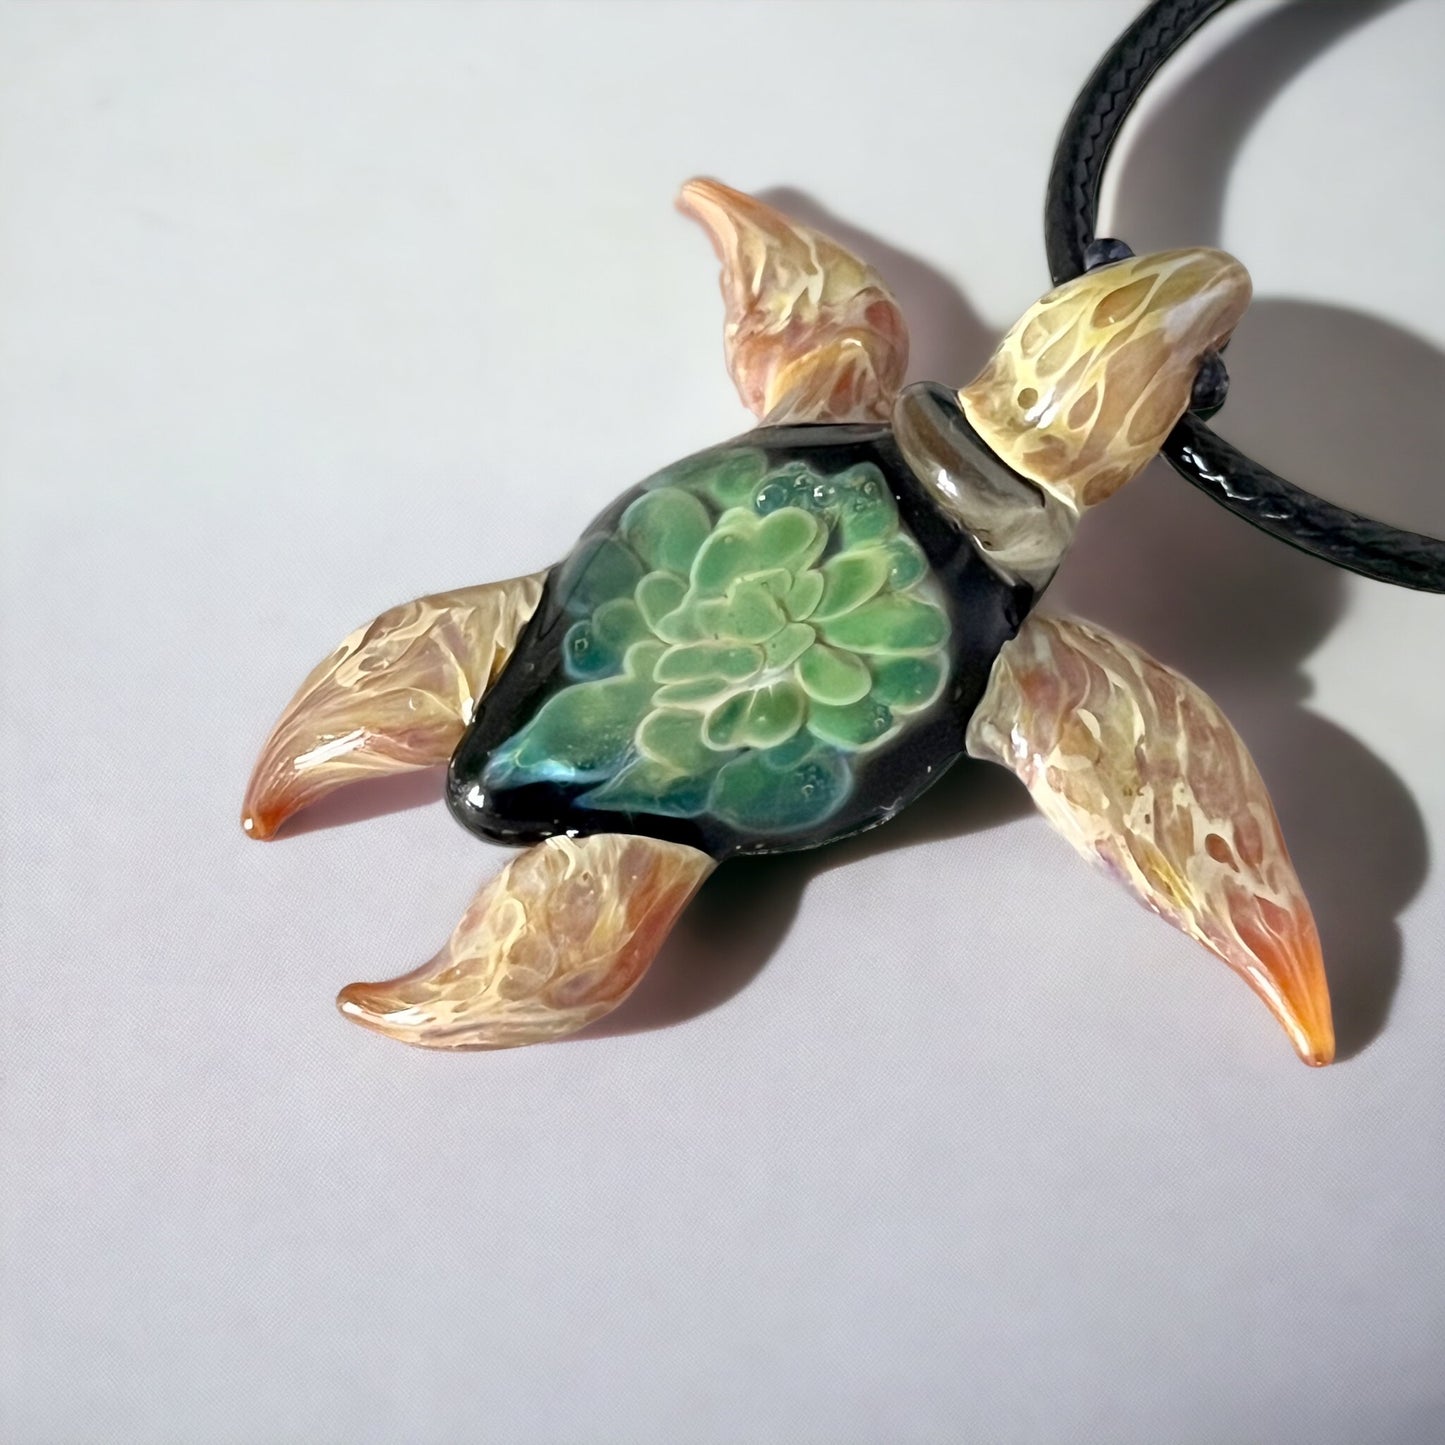 Exquisite Hawaiian Sea Turtle: Handcrafted Glass Pendant with Coral Reef Inside the Shell